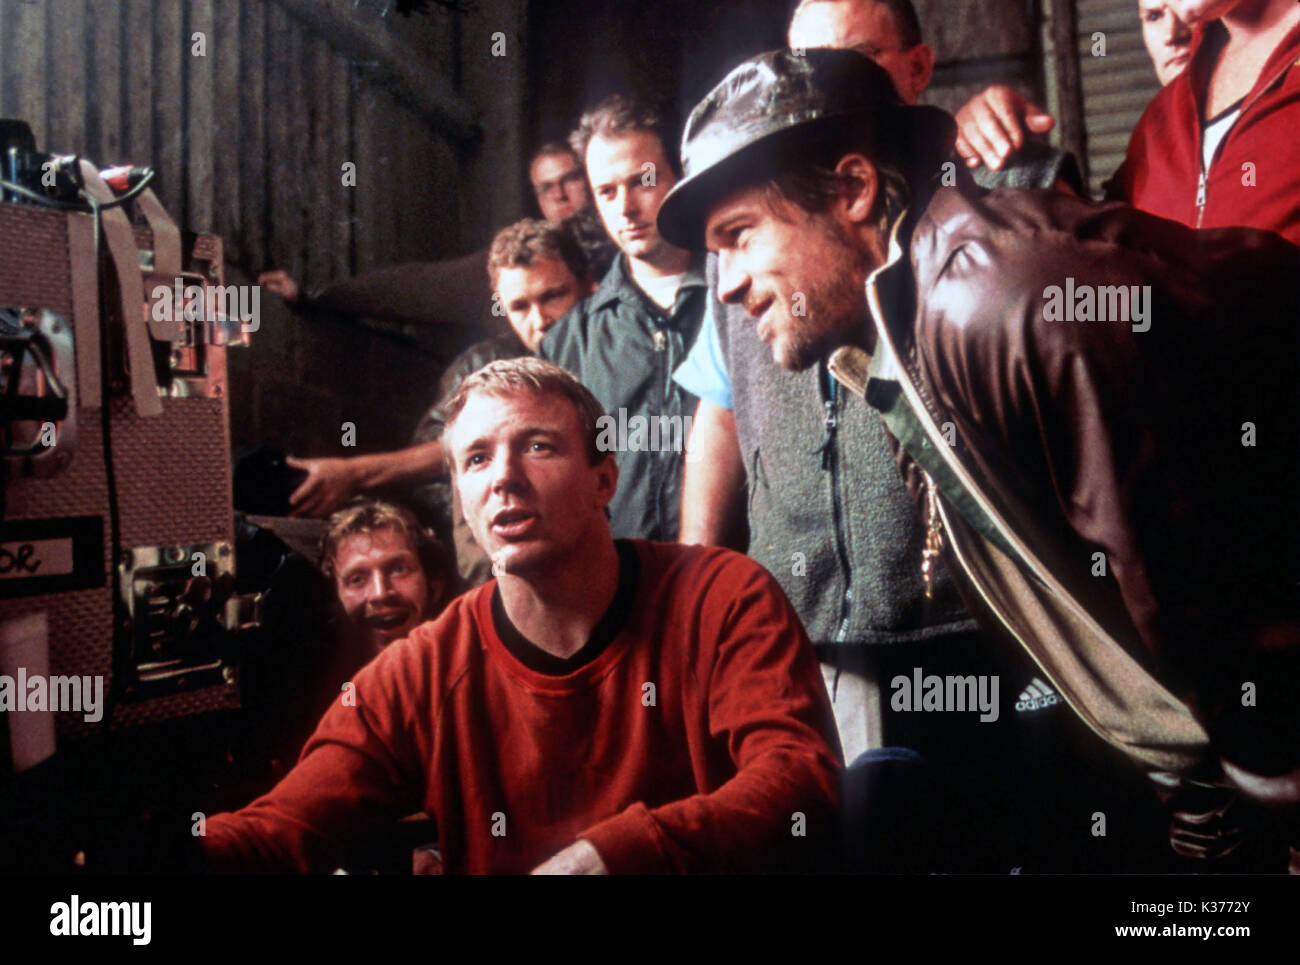 SNATCH Director GUY RITCHIE     Date: 2000 Stock Photo